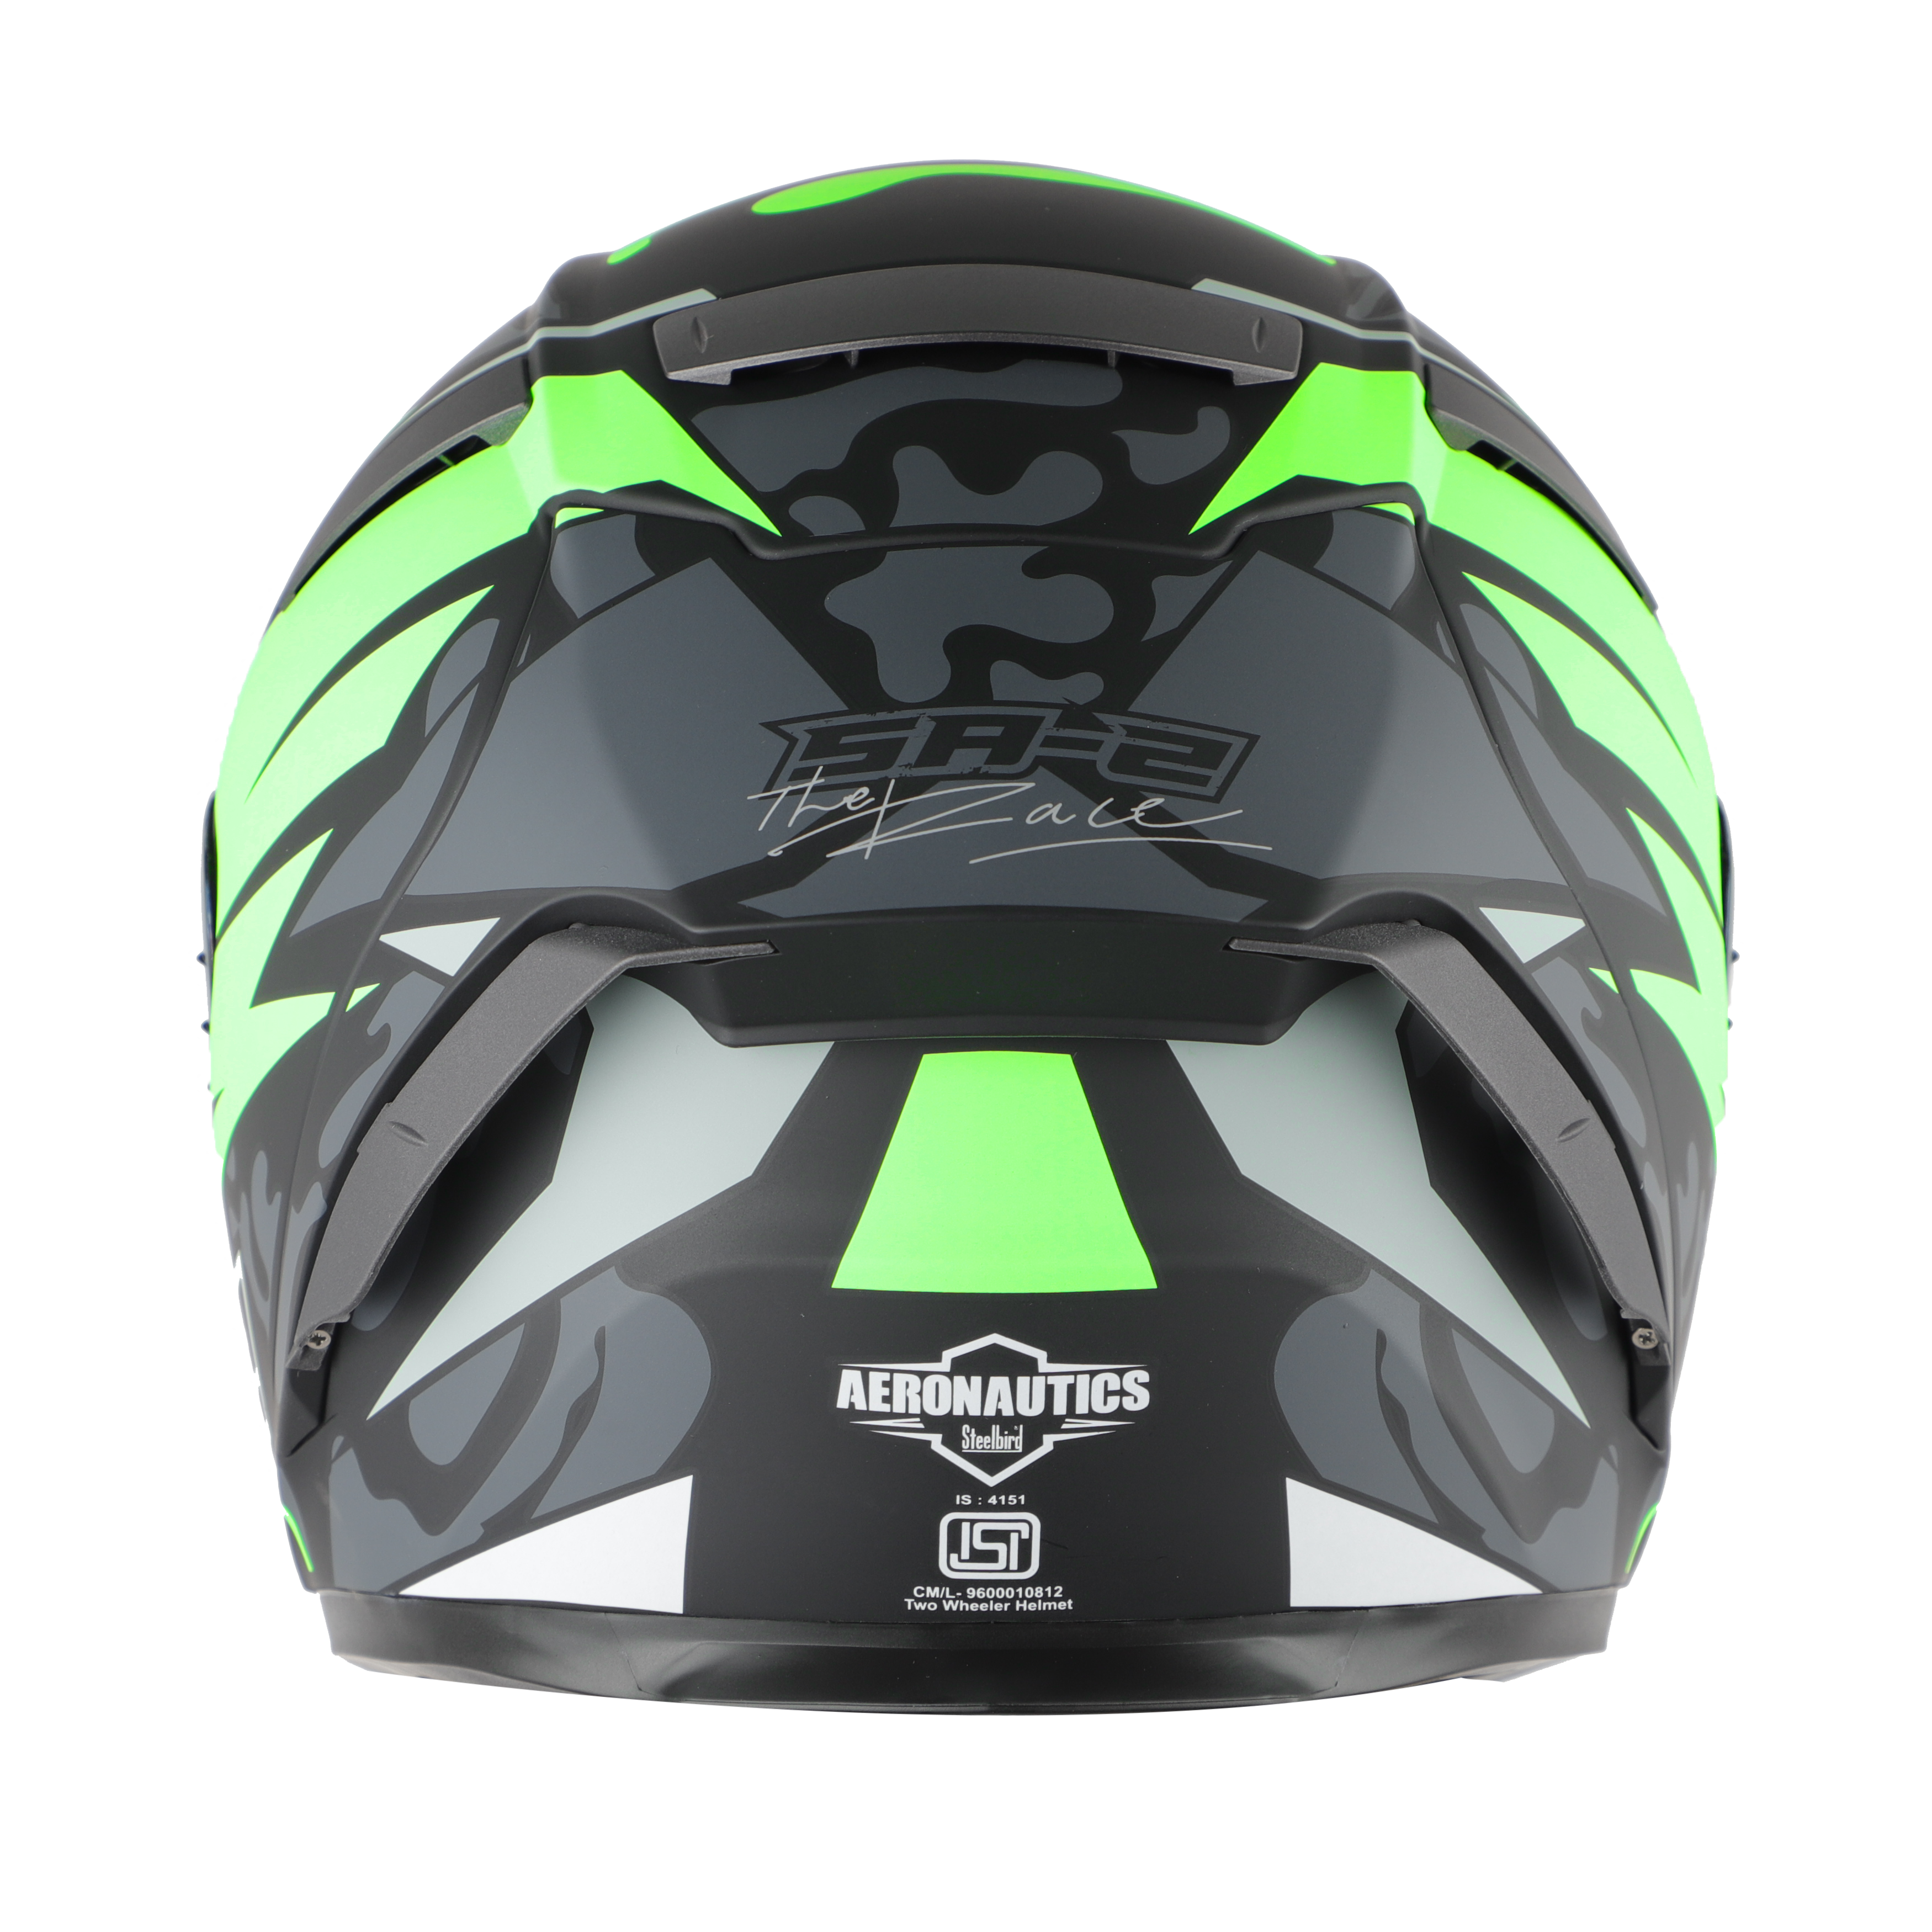 SA-2 TERMINATOR 3.0 MAT BLACK WITH GREEN FITTED WITH CLEAR VISOR EXTRA SMOKE VISOR FREE (WITH ANTI-FOR SHIELD HOLDER)